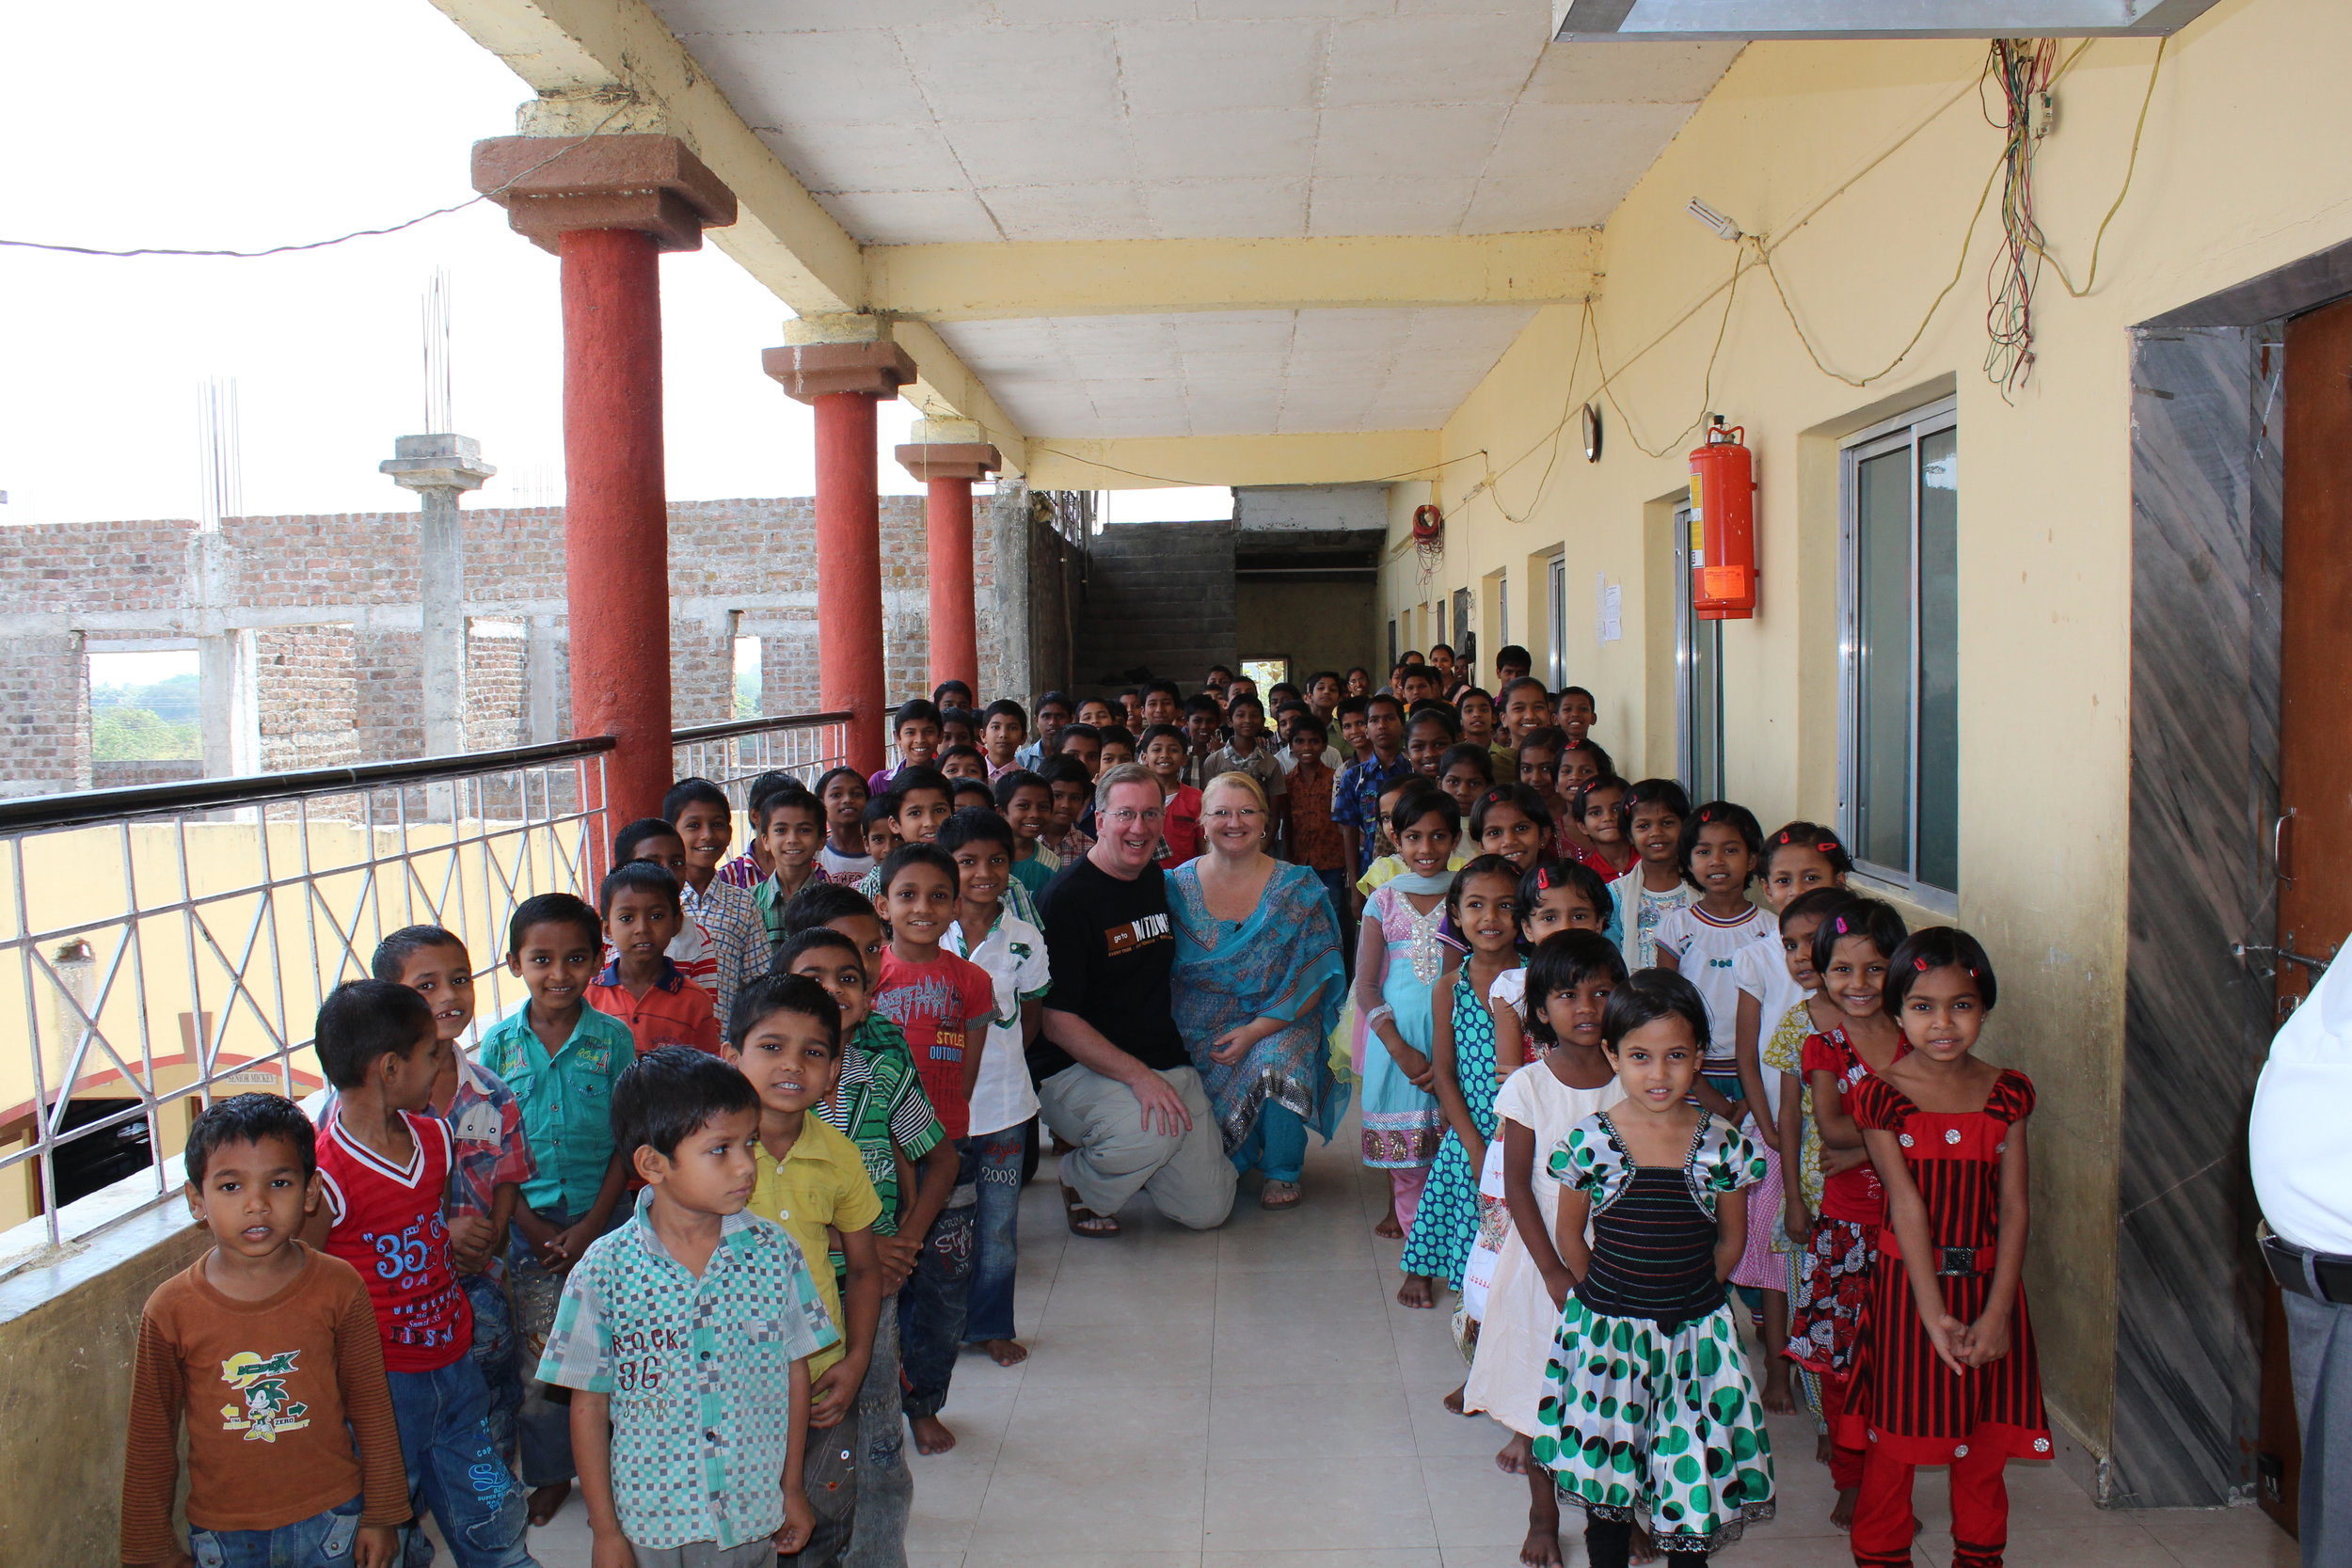 With all 80 of our children from the orphanage - Copy.JPG